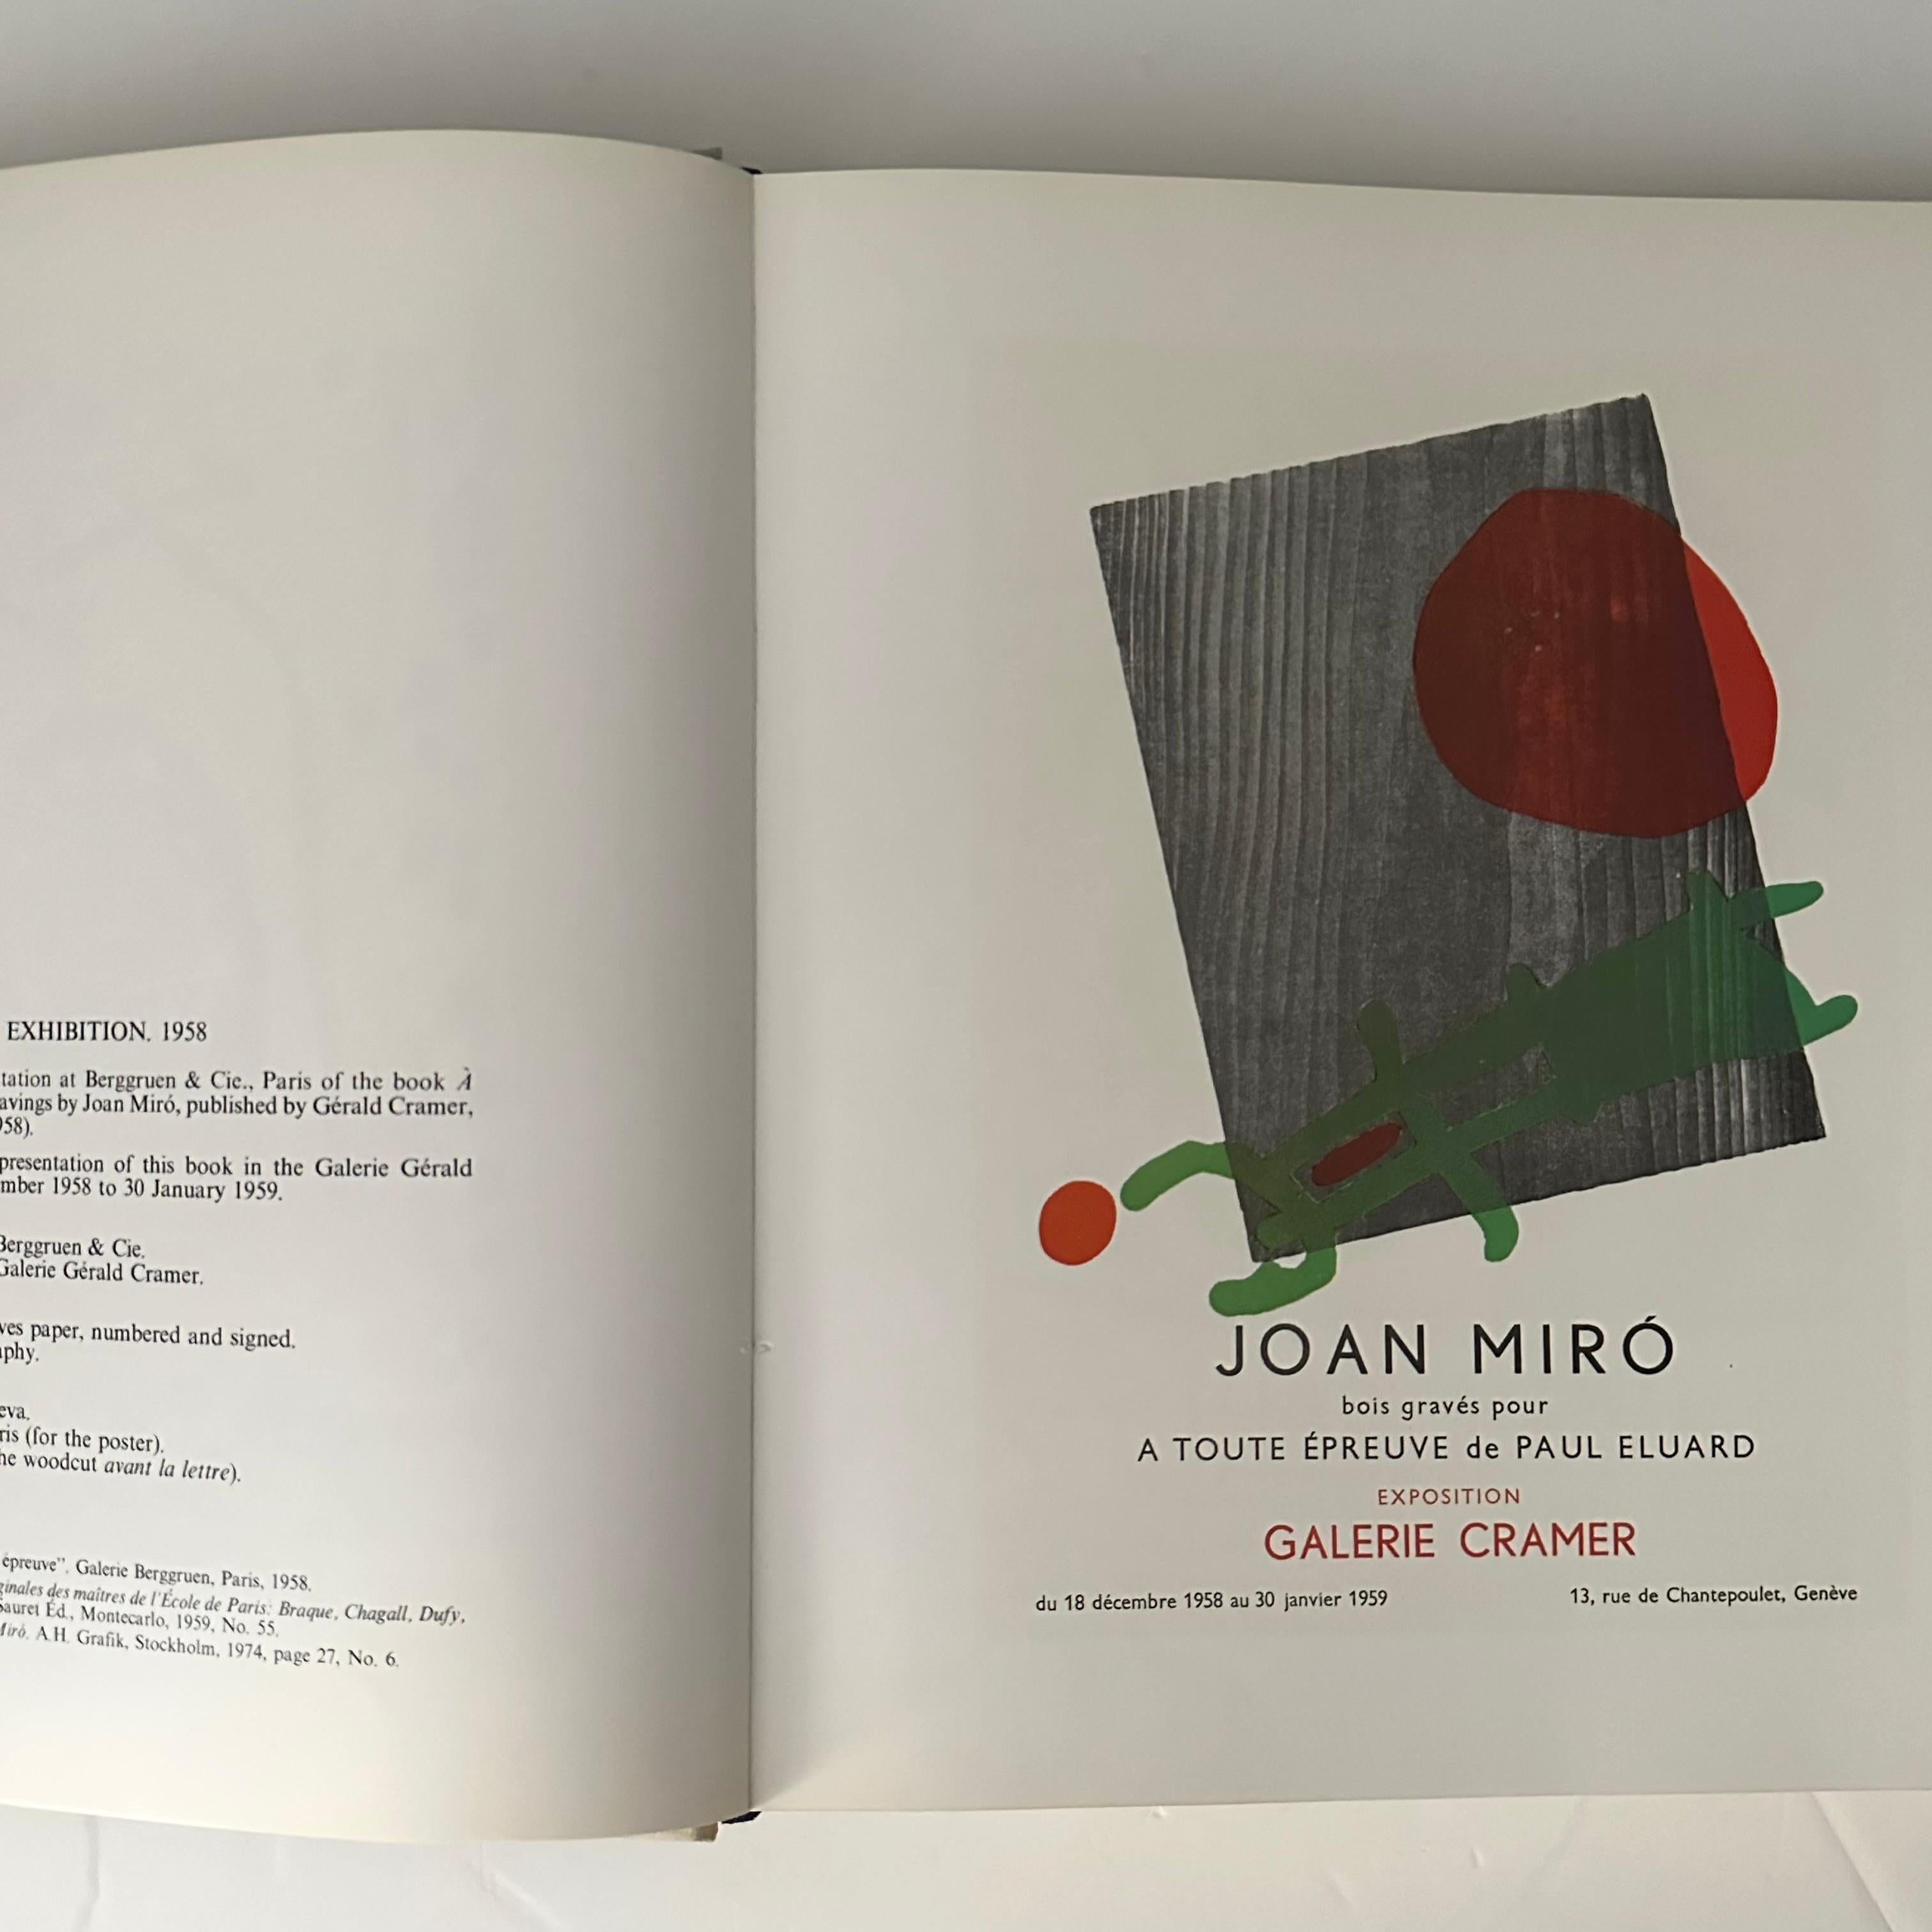 Published by Chartwell Books Inc, 1st English edition, New Jersey, 1980. Hardback with English text translated from the Spanish edition. 

Miró’s oeuvres have been interpreted from varying angles from the reference point of the 20th-century art